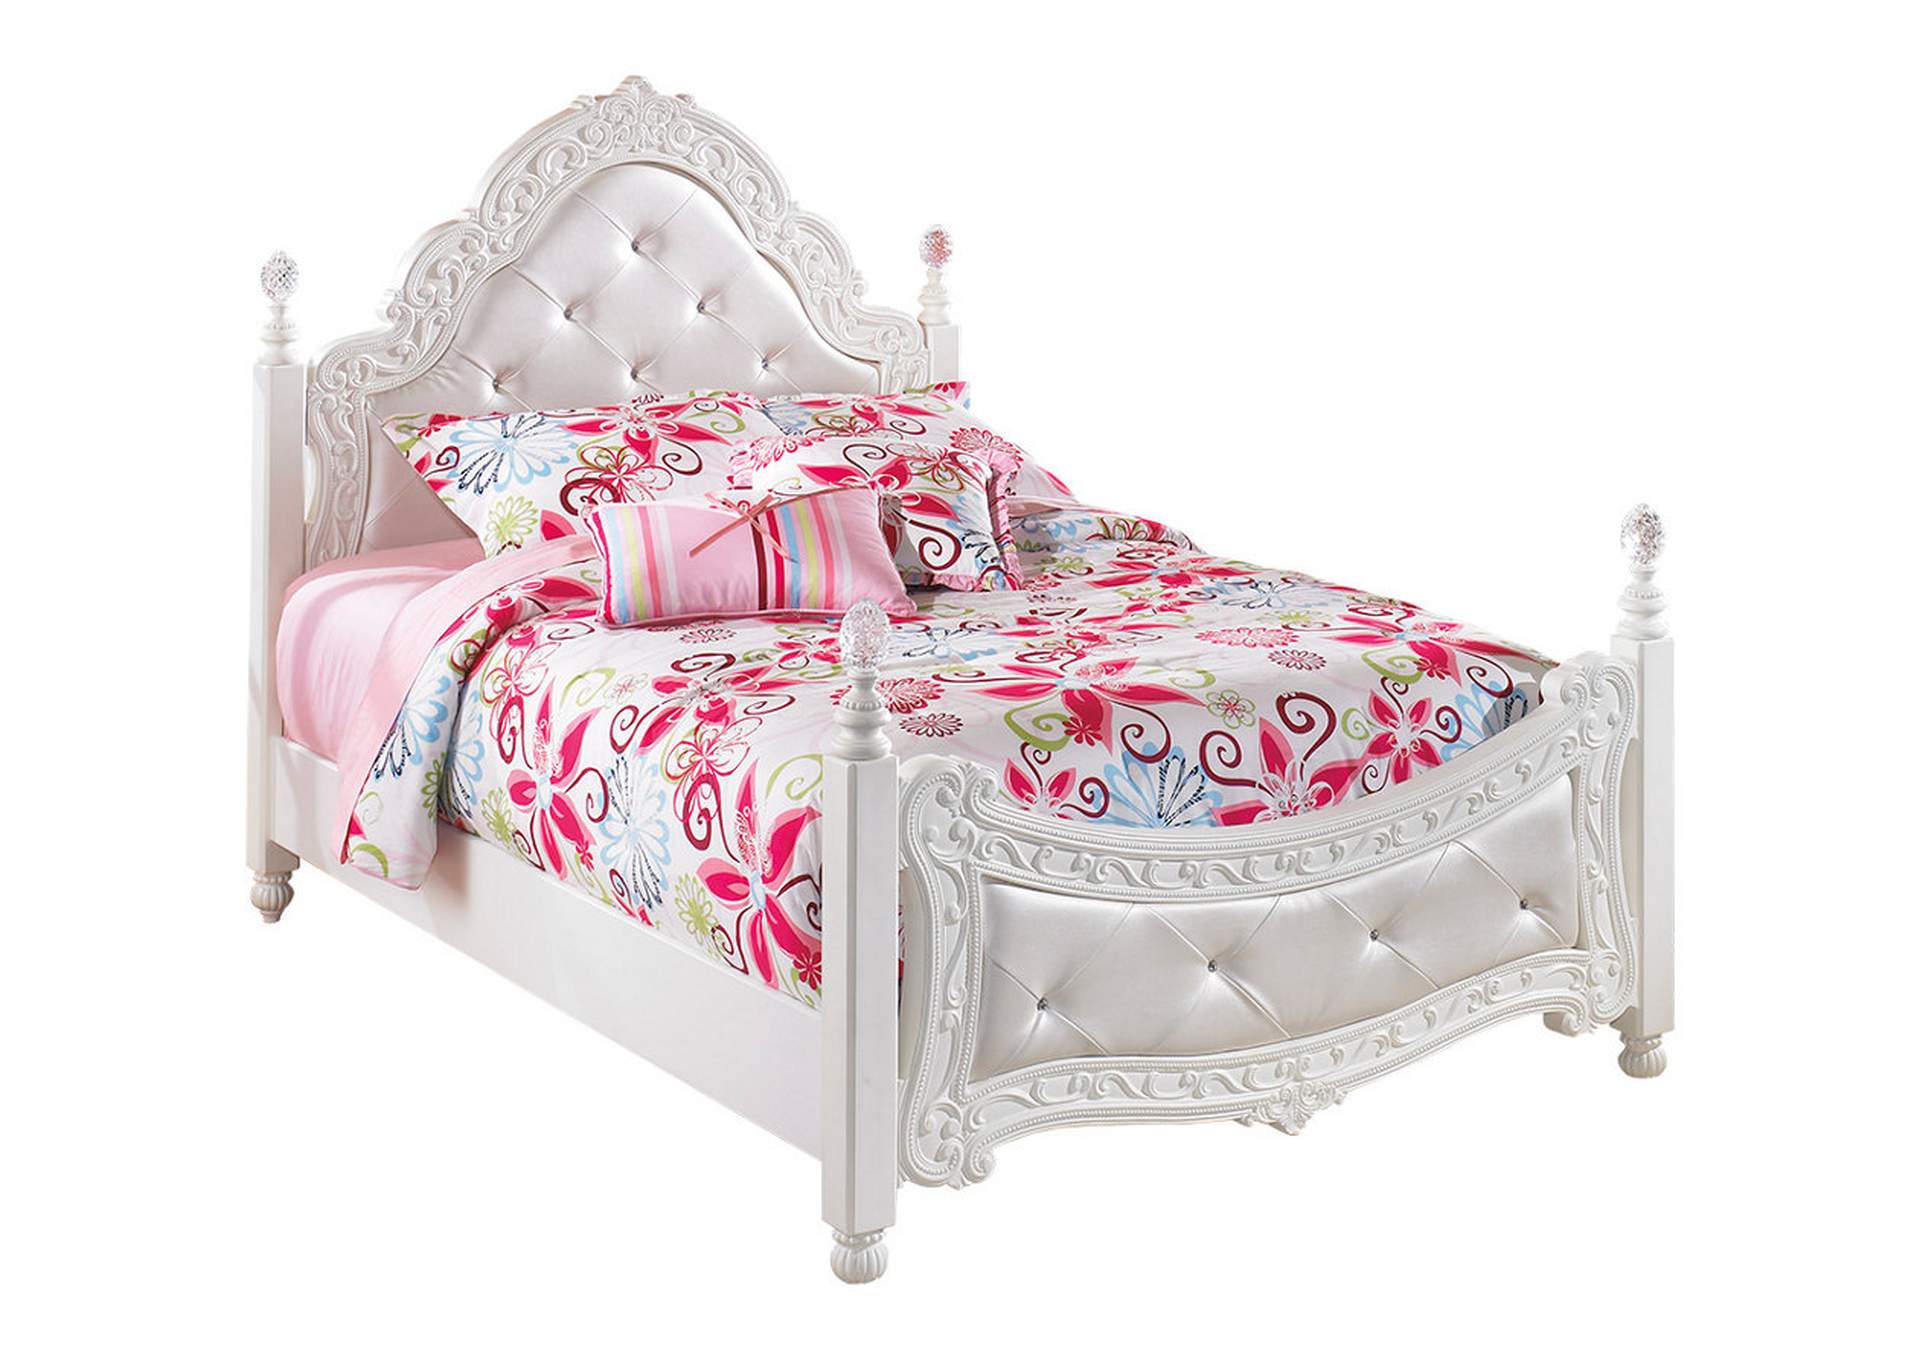 Exquisite Full Poster Bed,Signature Design By Ashley